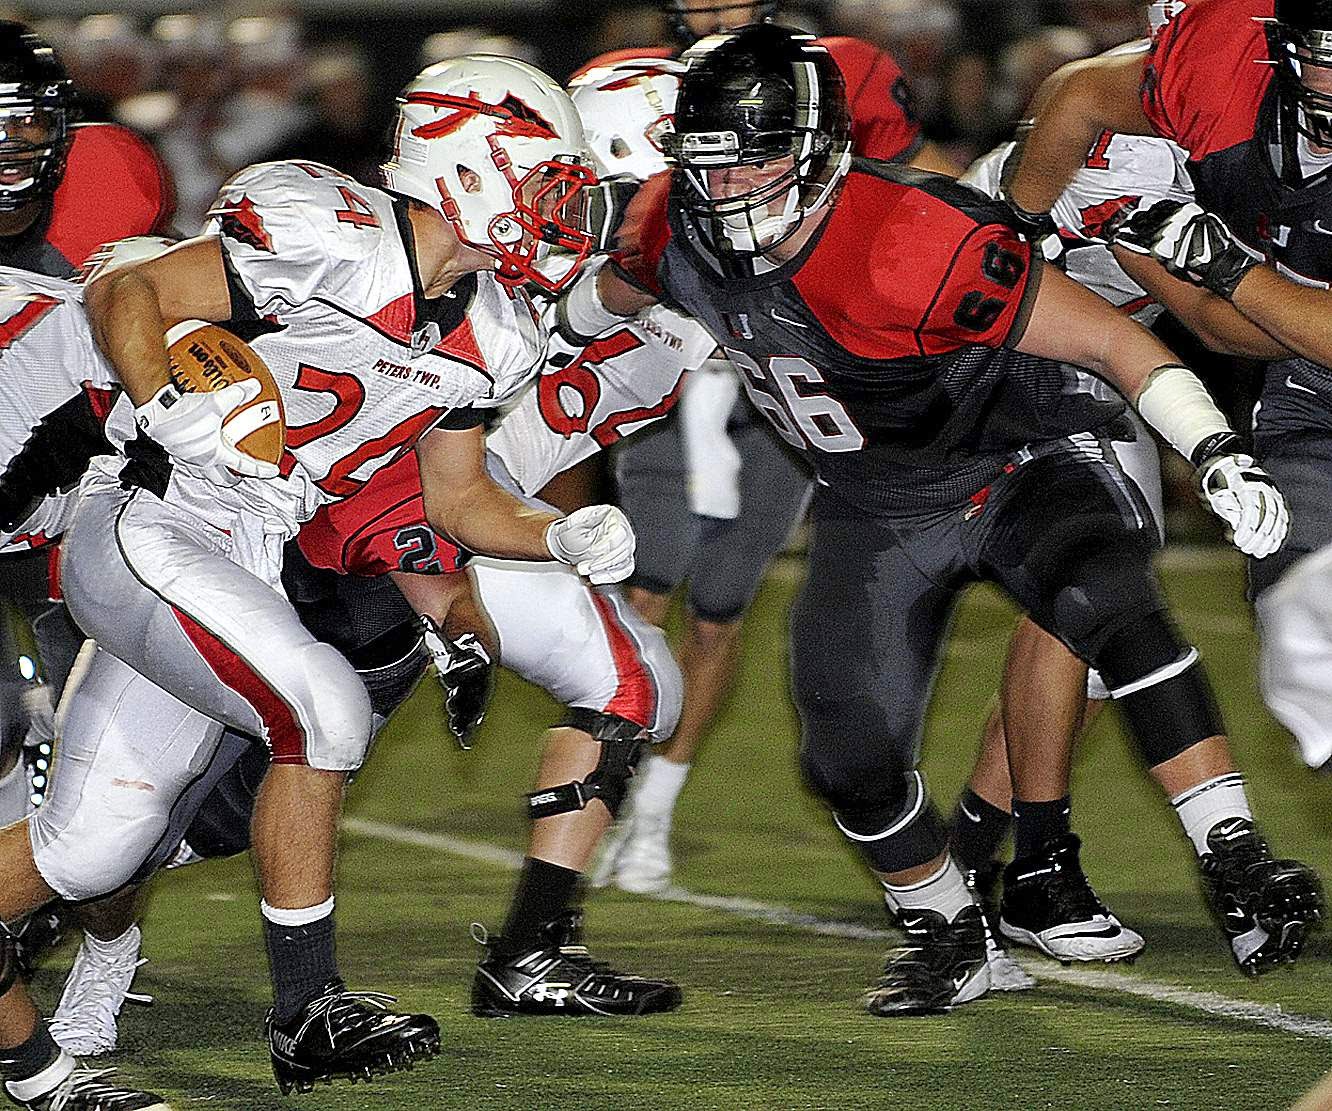 The Varsity Letters: Notes on Peters Township football as 2014 approaches